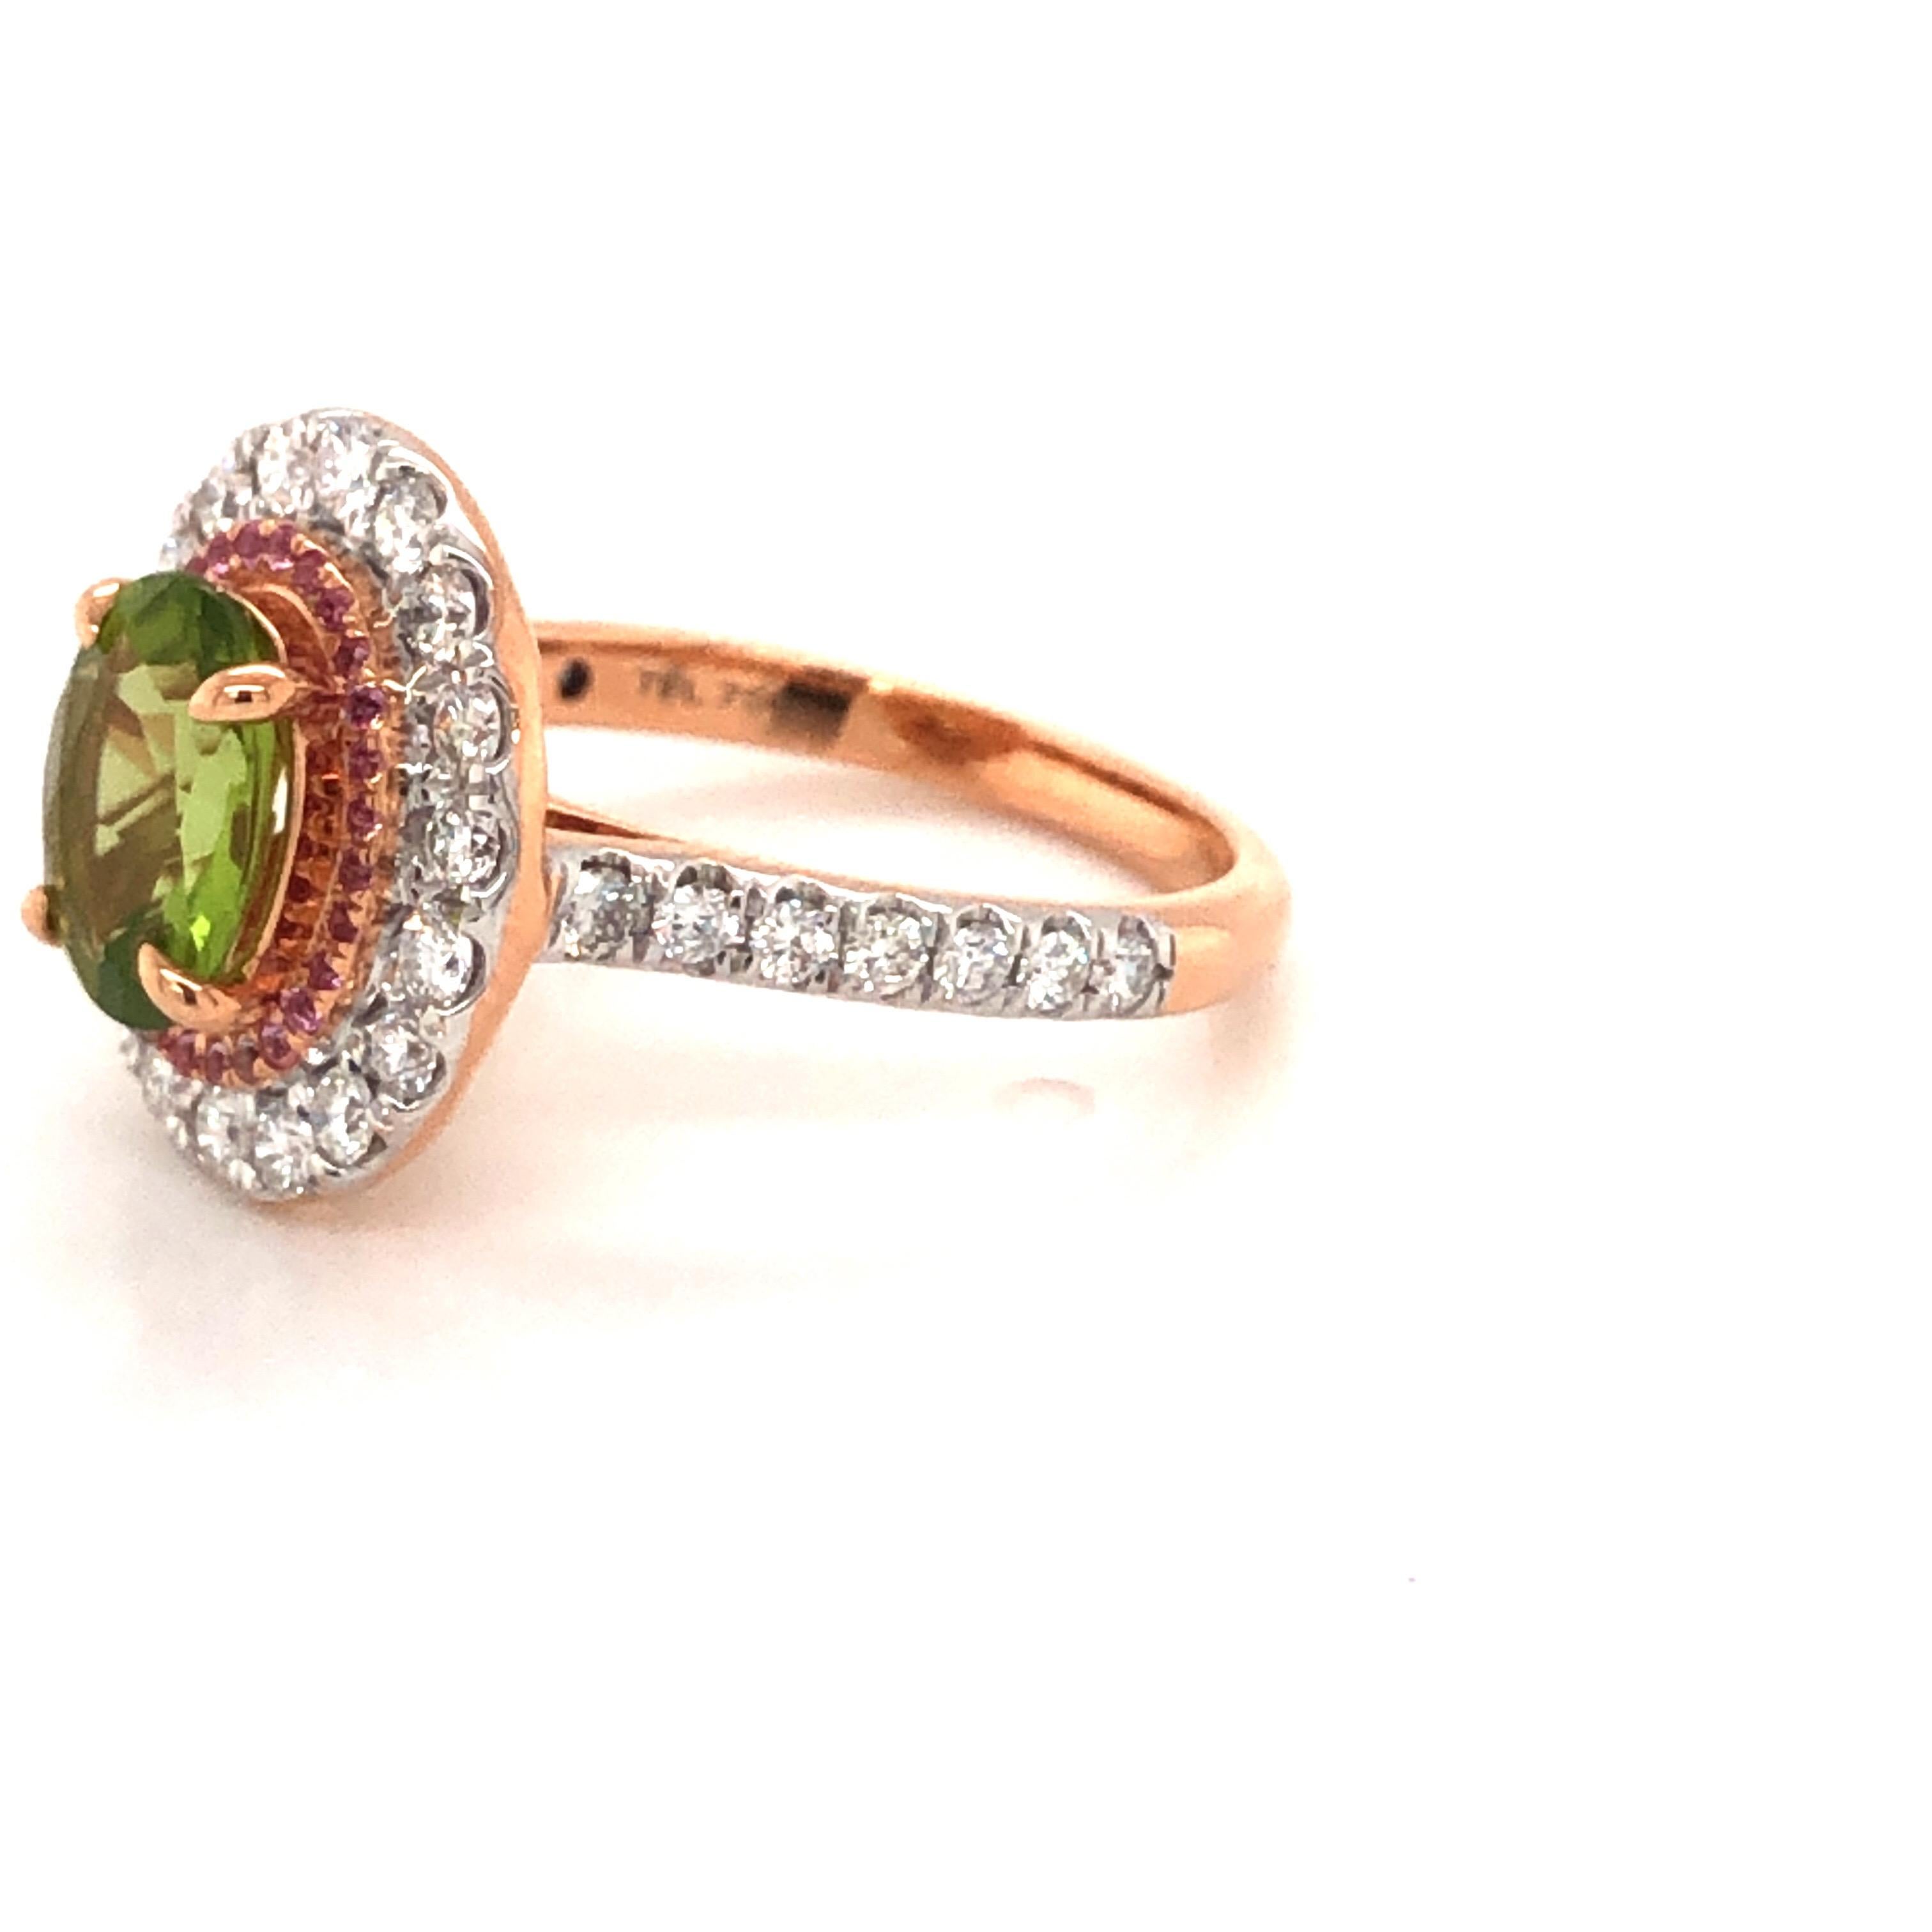 A bespoke and magnificent 18 karat rose gold ring with green peridot a pink sapphire halo and white natural round brilliant cut diamonds for outer halo and top part of the shank. Ideal as an engagement, dress or a cocktail ring. Can be customised in